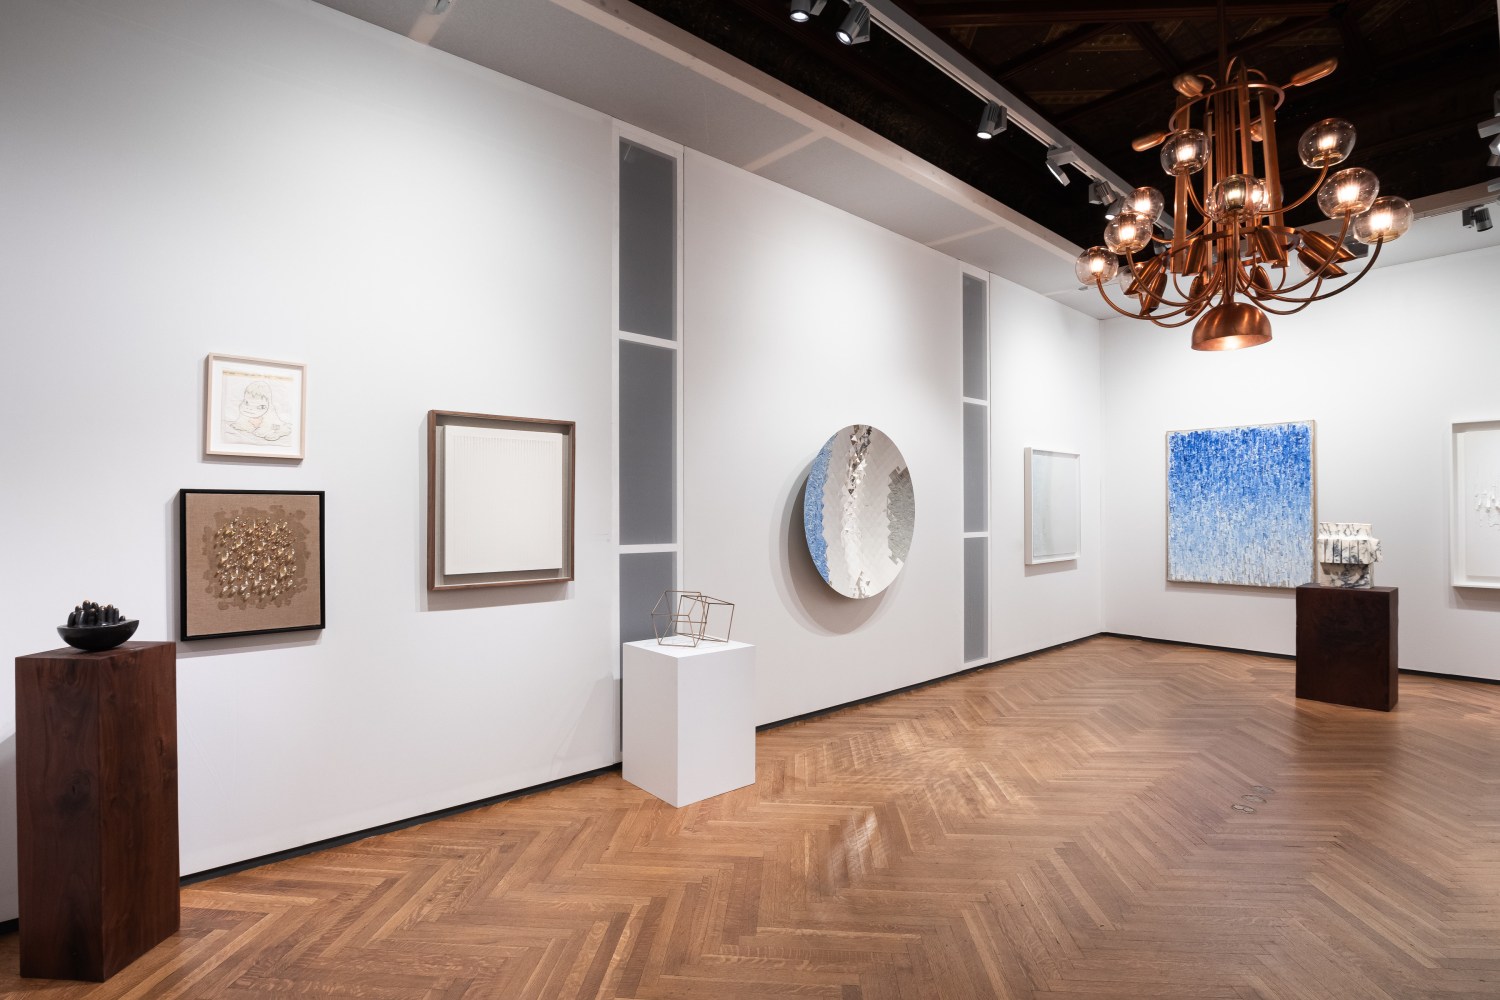 Installation view of TEFAF New York 2022 (BOOTH 210). Image courtesy of Tina Kim Gallery. Photo © Charles Roussel / Ocula